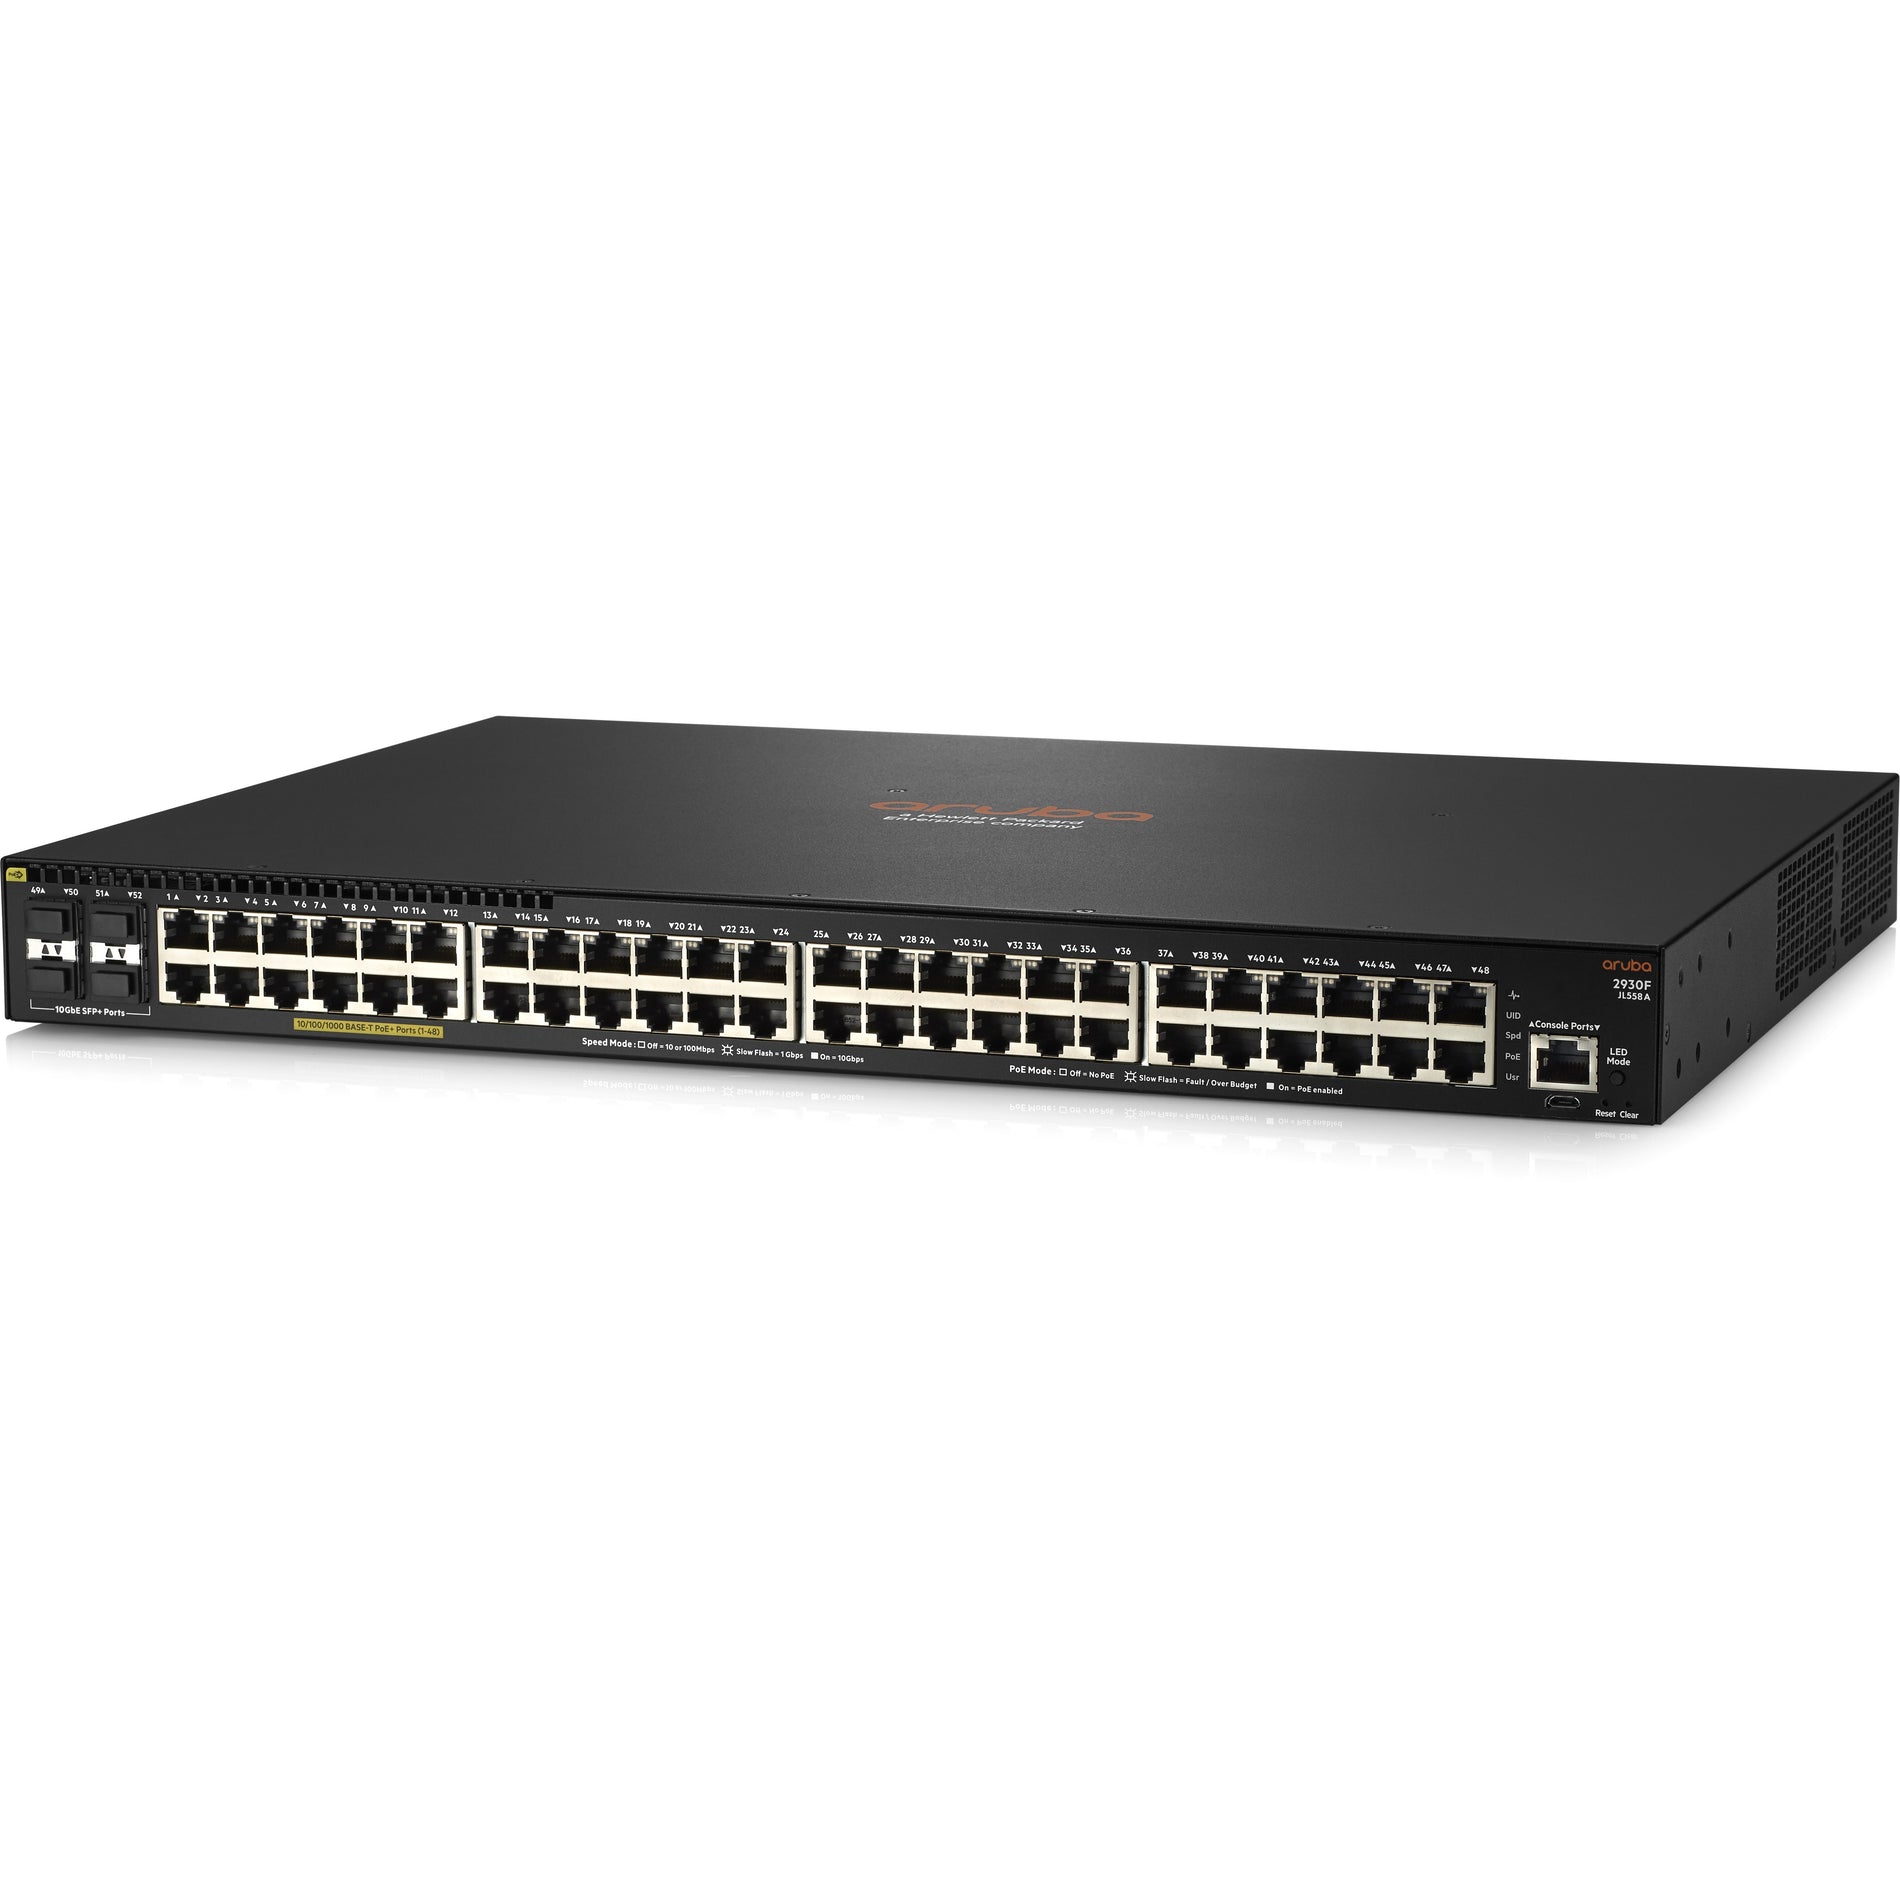 Aruba JL558A 2930F 48G PoE+ 4SFP+ Switch, High-Performance Networking Solution